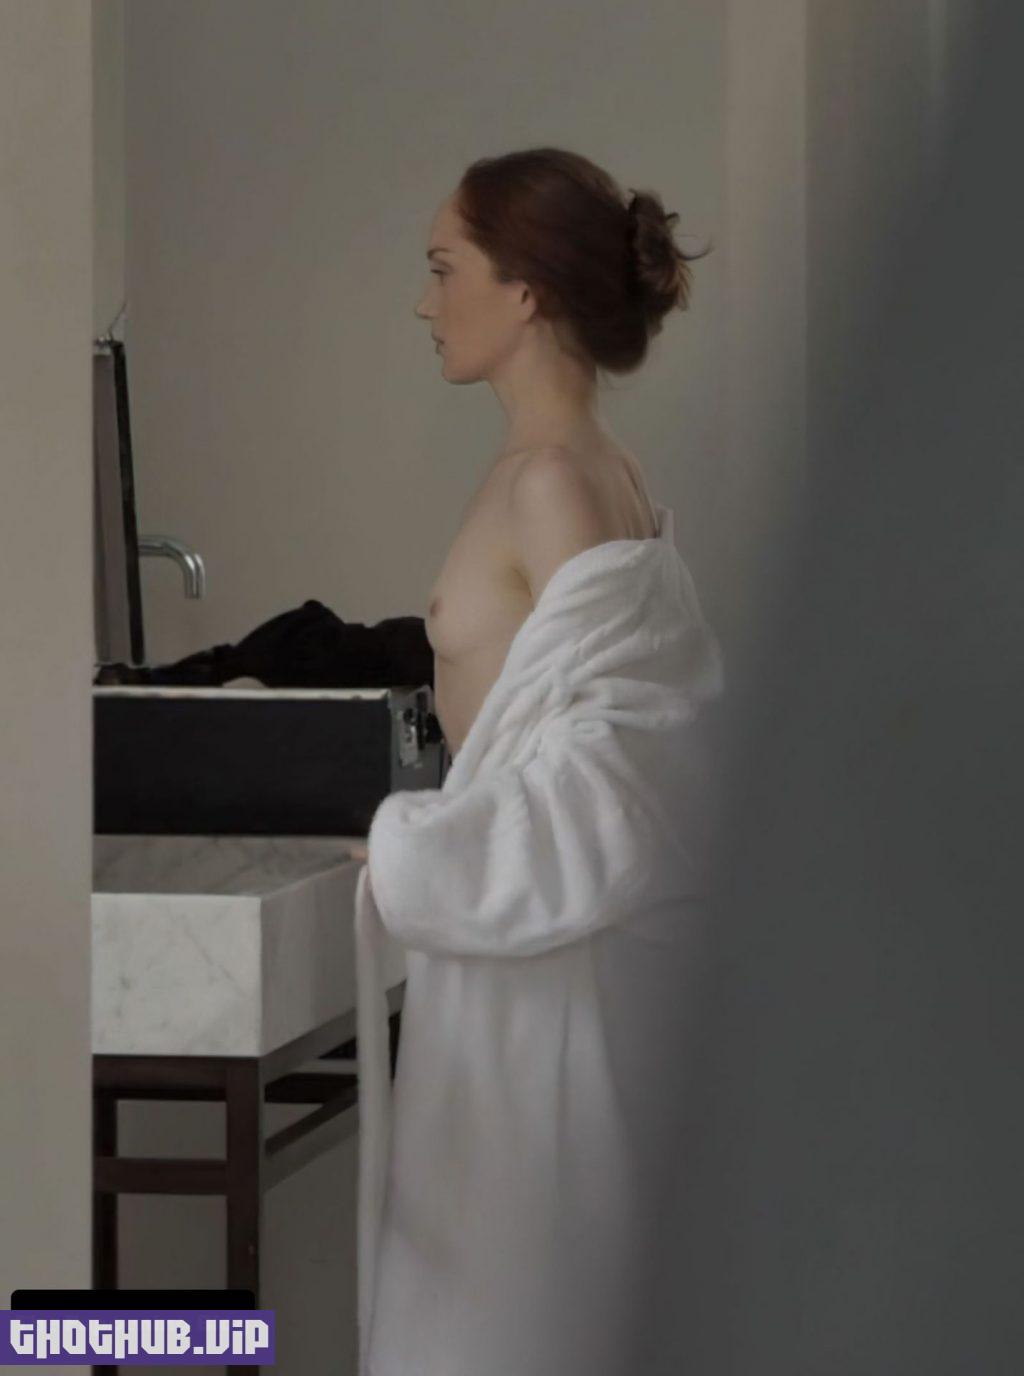 Lotte Verbeek Nude Photo Collection The Fappening Blog 1